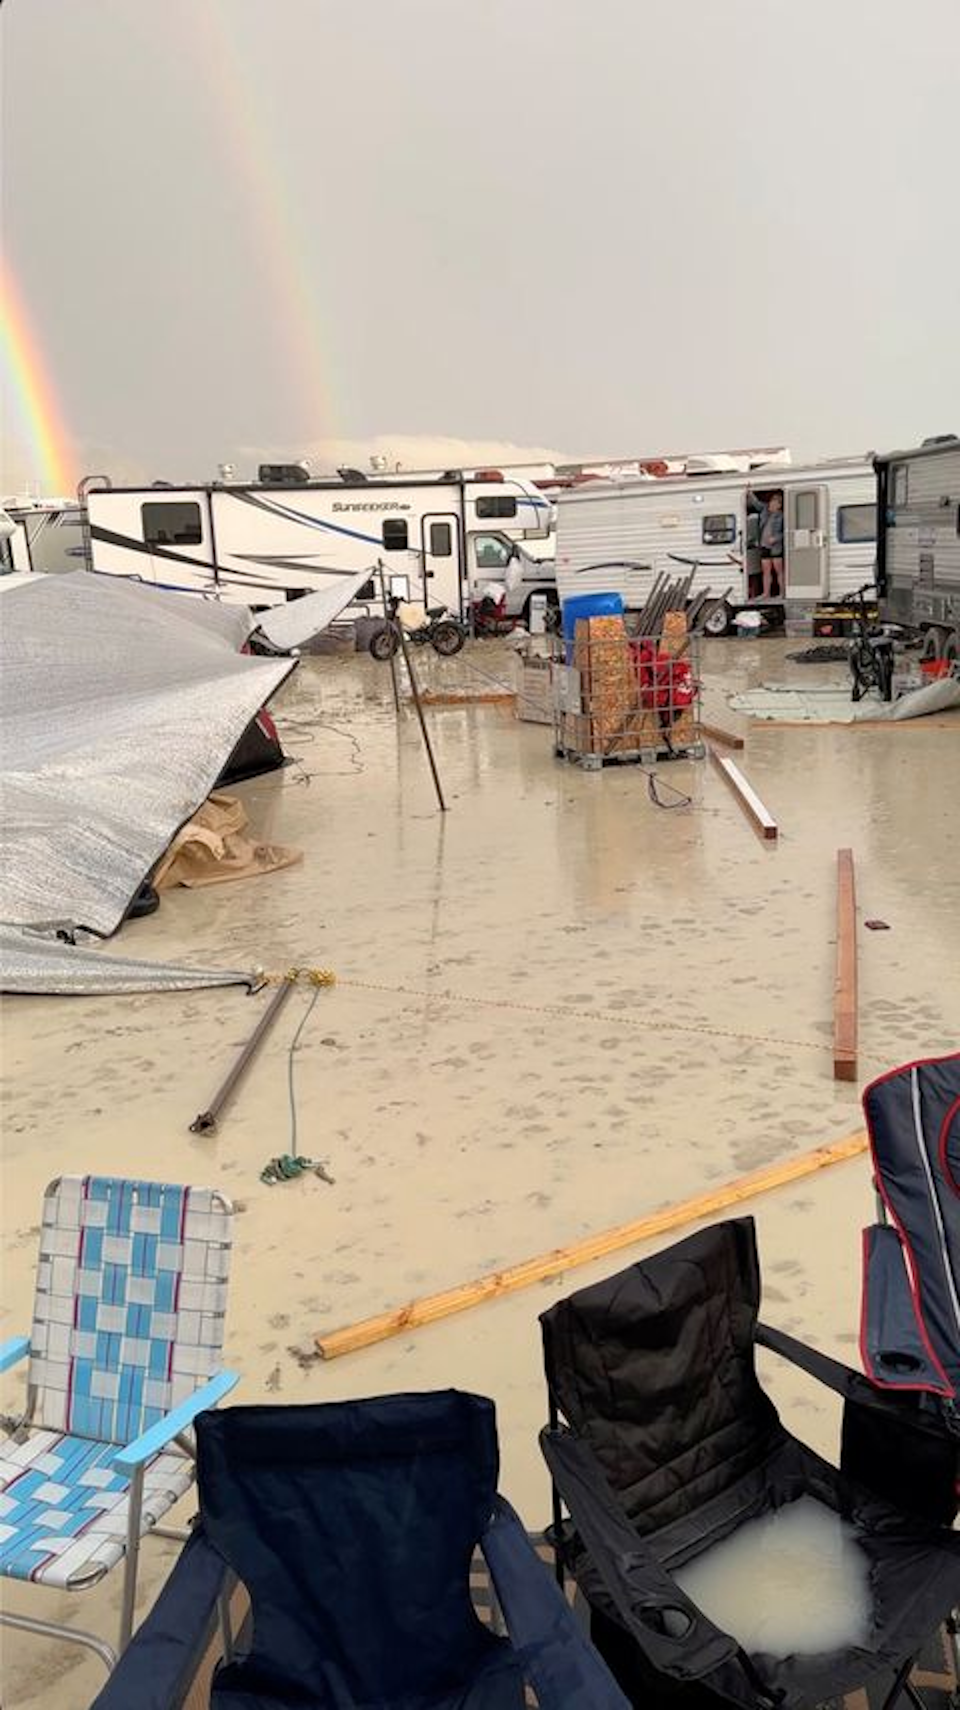 Mud covers the ground at the site of the Burning Man festival in Black Rock, Nevada, U.S., on 1 September 2023, in this screen grab obtained from a social media video. A double rainbow appears in the background against the rainy sky. Photo: Paul Reder / REUTERS